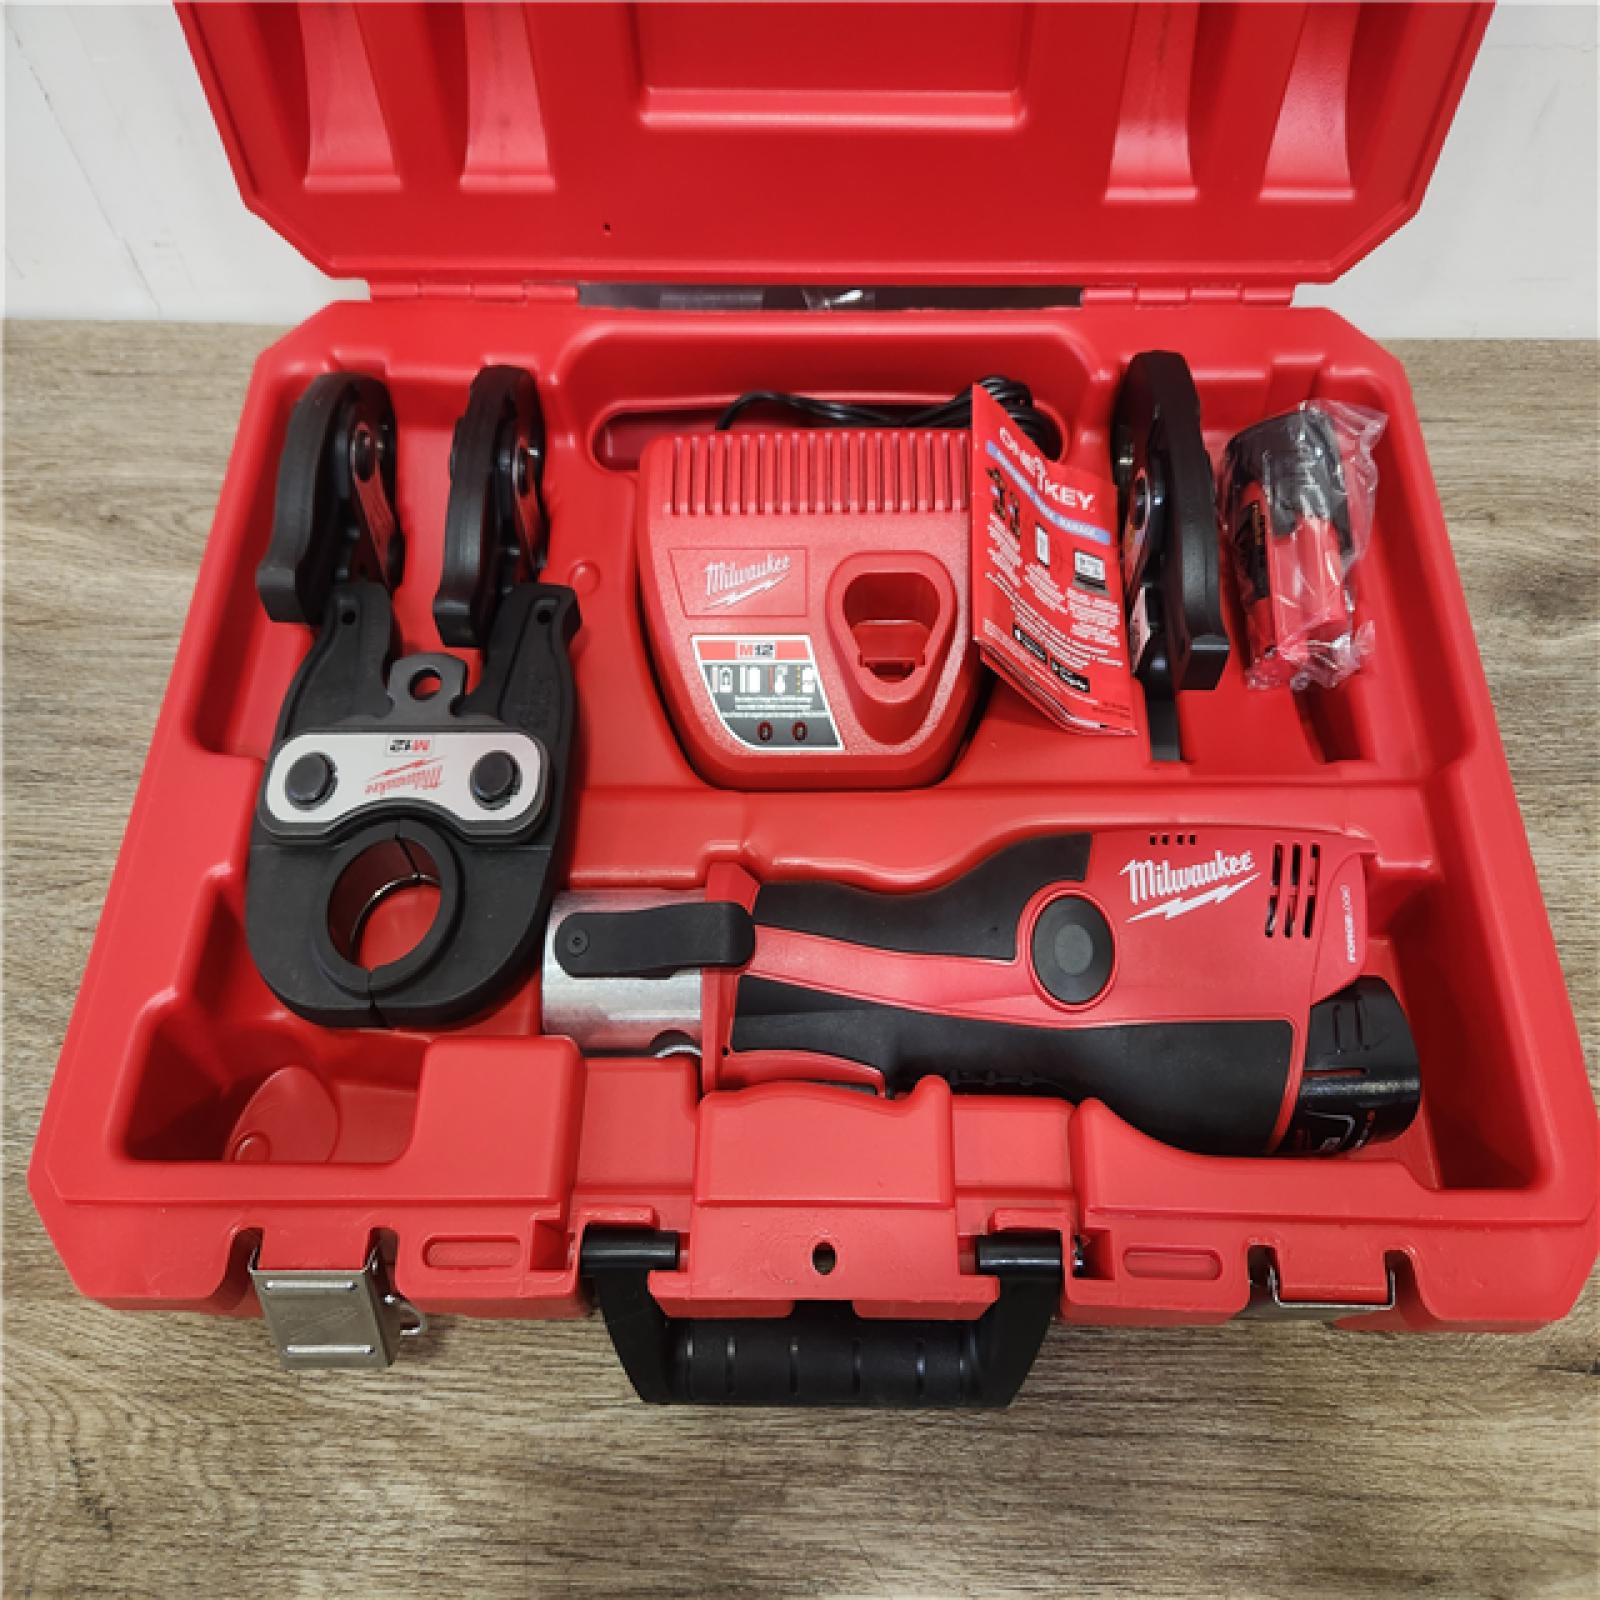 Phoenix Location Milwaukee M12 12-Volt Lithium-Ion Force Logic Cordless Press Tool Kit w/ 1/2 in. - 1-1/4in. CTS Jaws, (2) 1.5Ah Batteries & Case